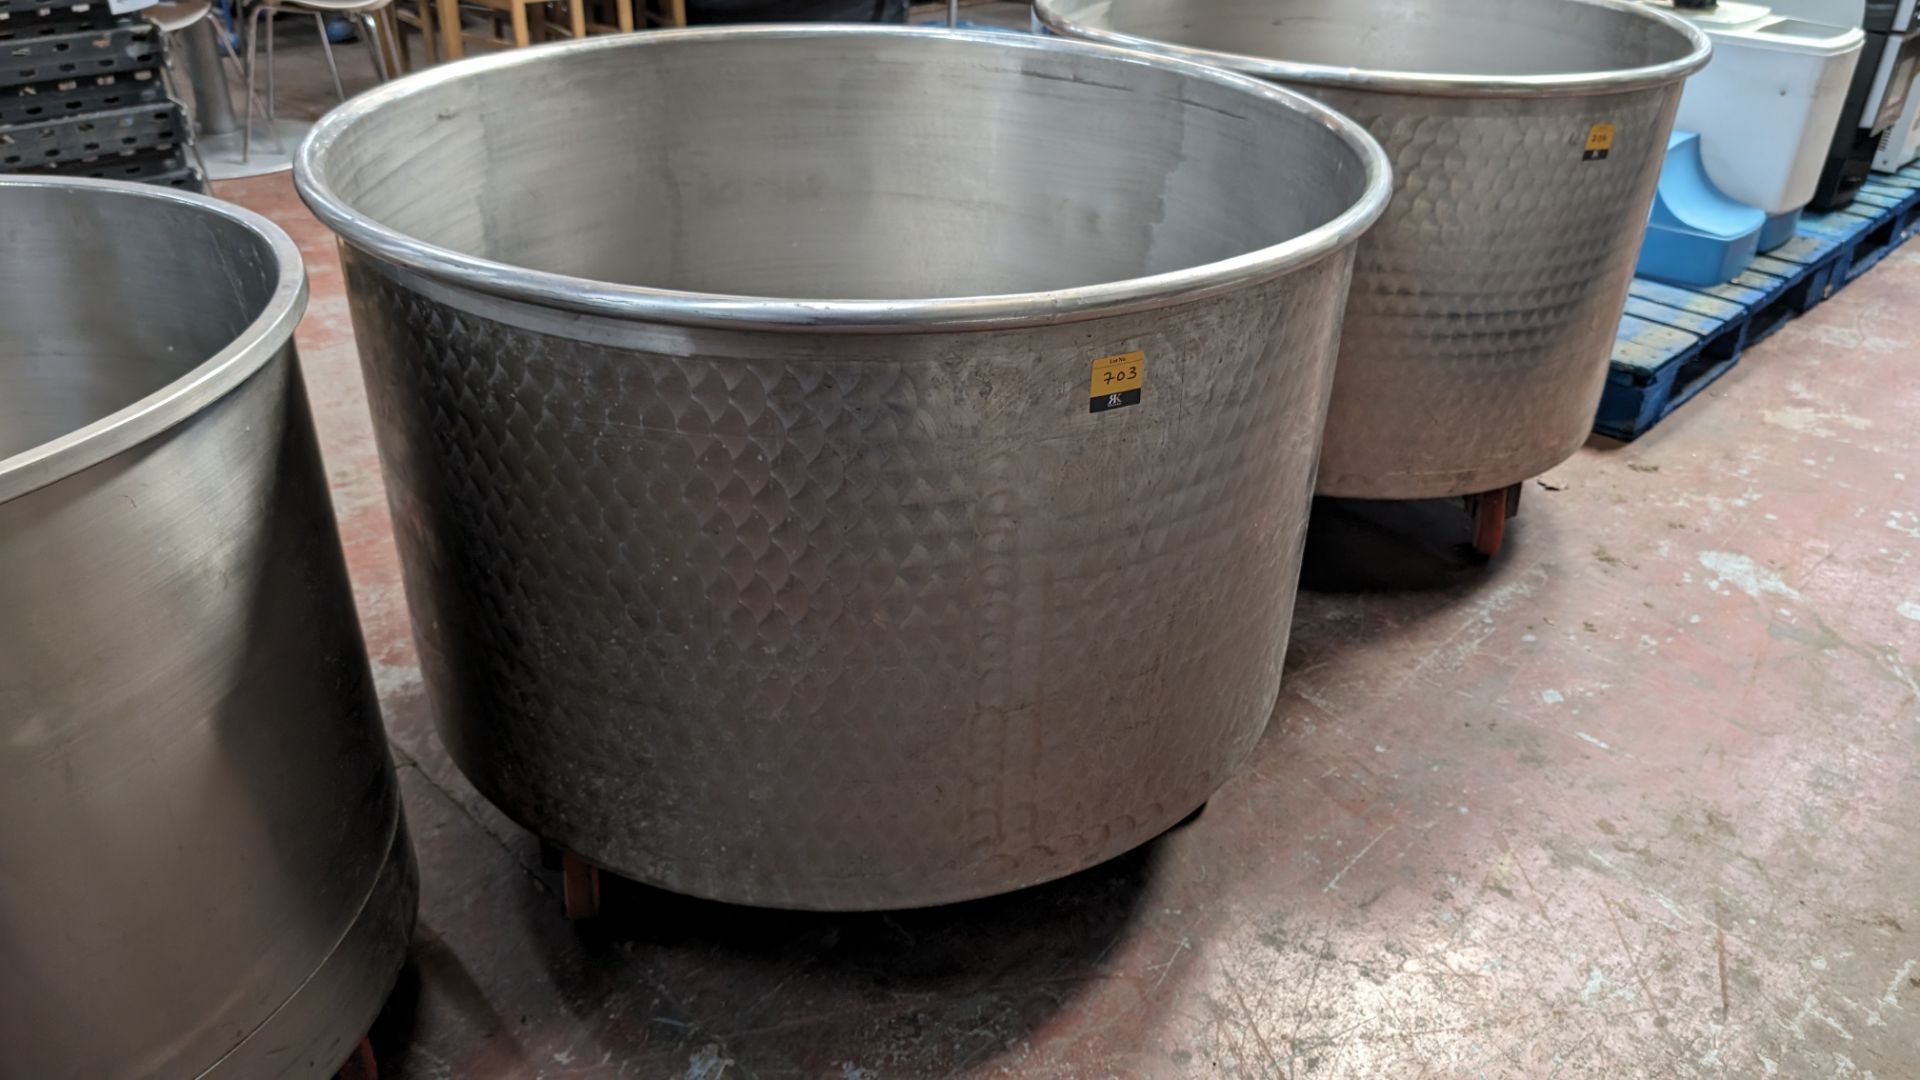 Wheeled tank in stainless steel - 600L capacity. Understood to have been bought in 2020 - Image 2 of 5